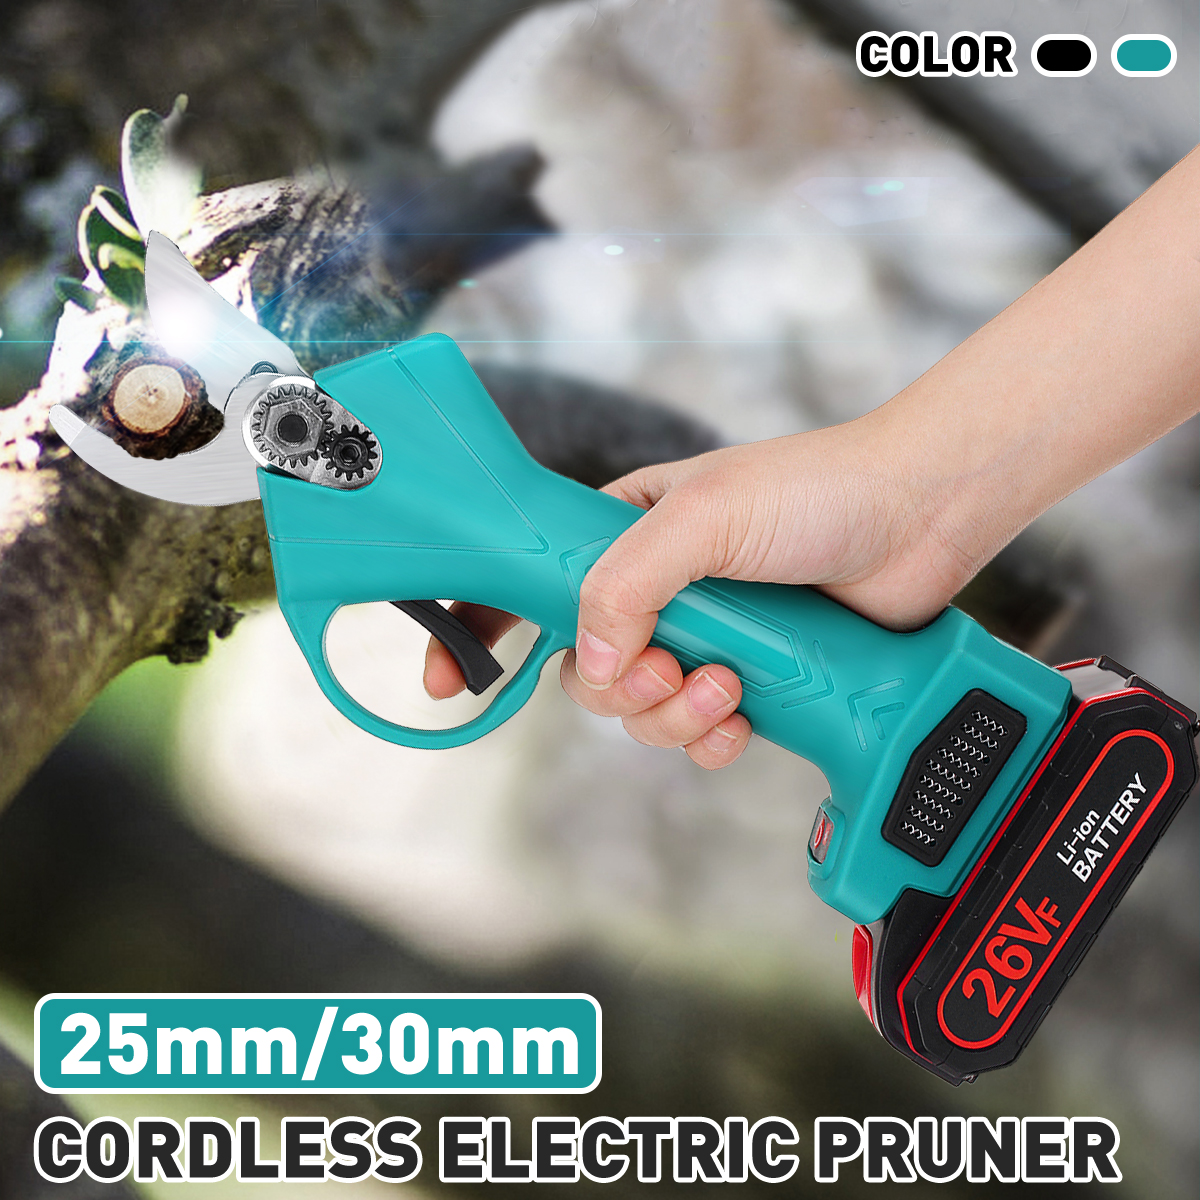 21V-2530mm-Cordless-Electric-Pruning-Secateur-Shears-Portable-Electric-Scissors-W-1pc-Battery-1816359-1